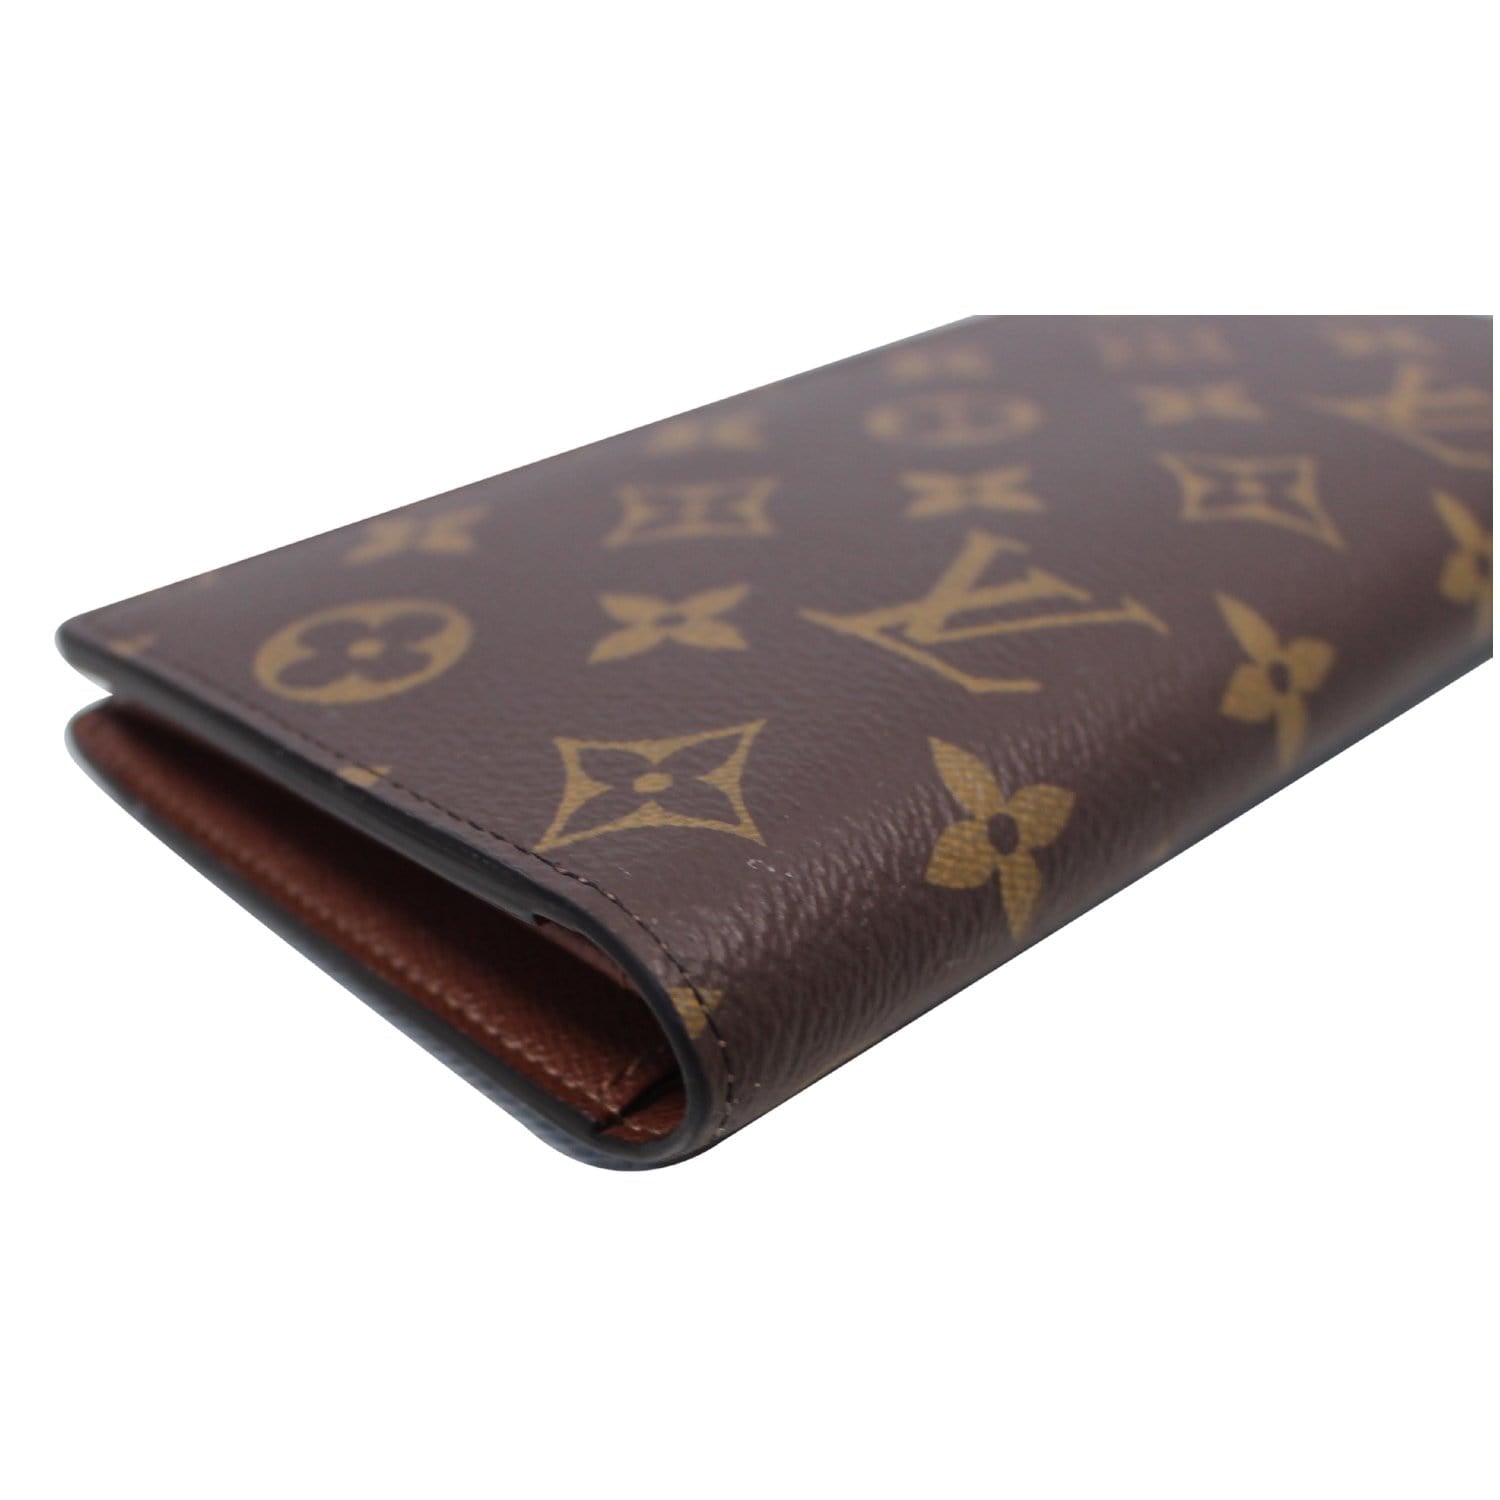 LOUIS VUITTON wallet in brown monogram coated canvas - VALOIS